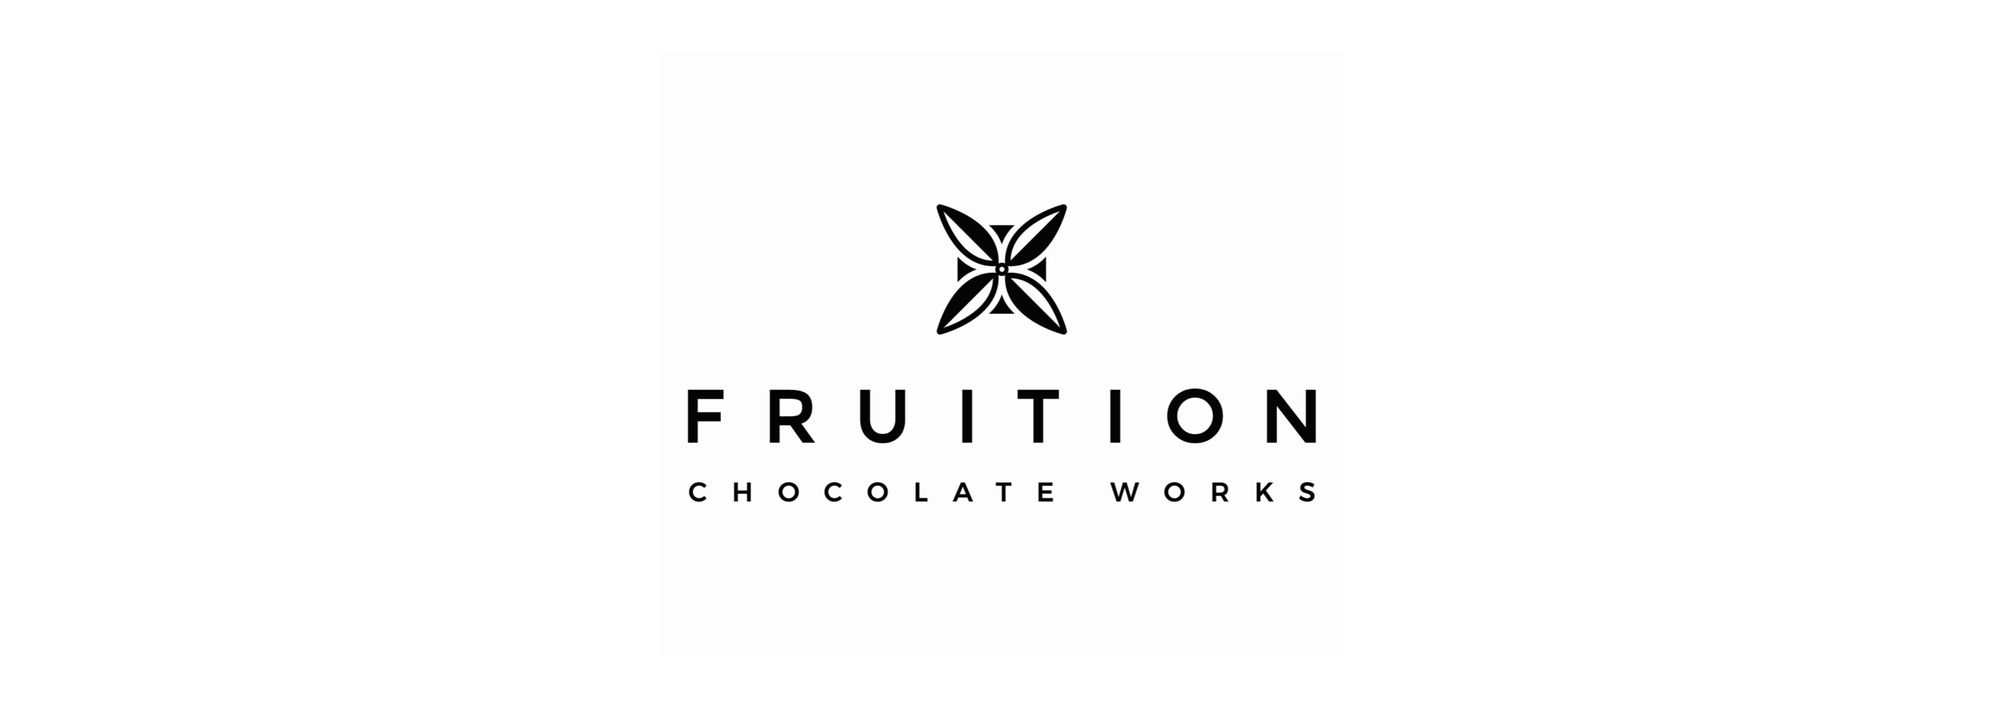 Small-Batch Bean-to-Bar Chocolate - Fruition Chocolate Works